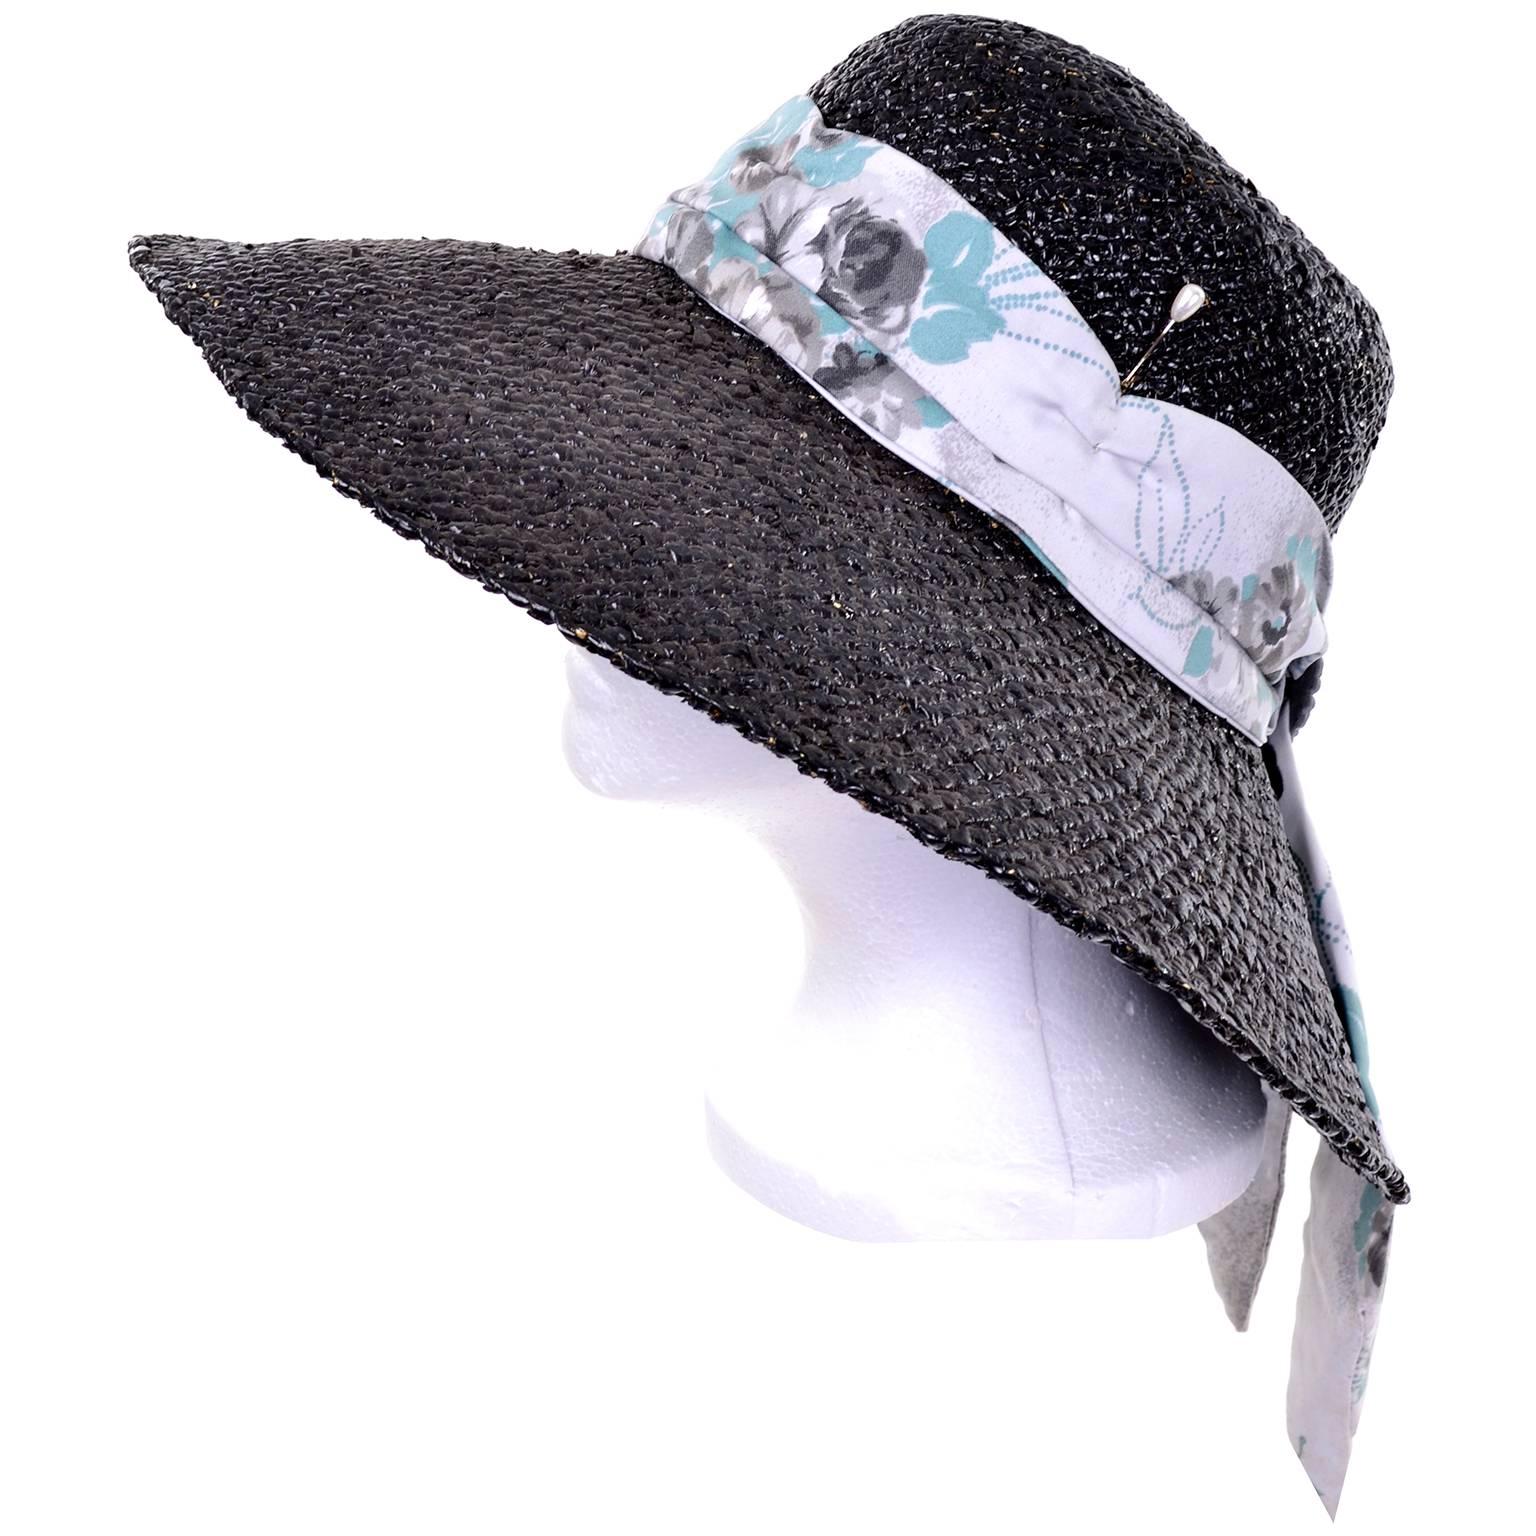 This mid century vintage black painted straw hat was designed by Mr. Blackwell. Mr. Blackwell made hats for his socialite female friends and celebrities and this is the only hat designed by him that I've ever seen. The hat has a scarf and buckle and